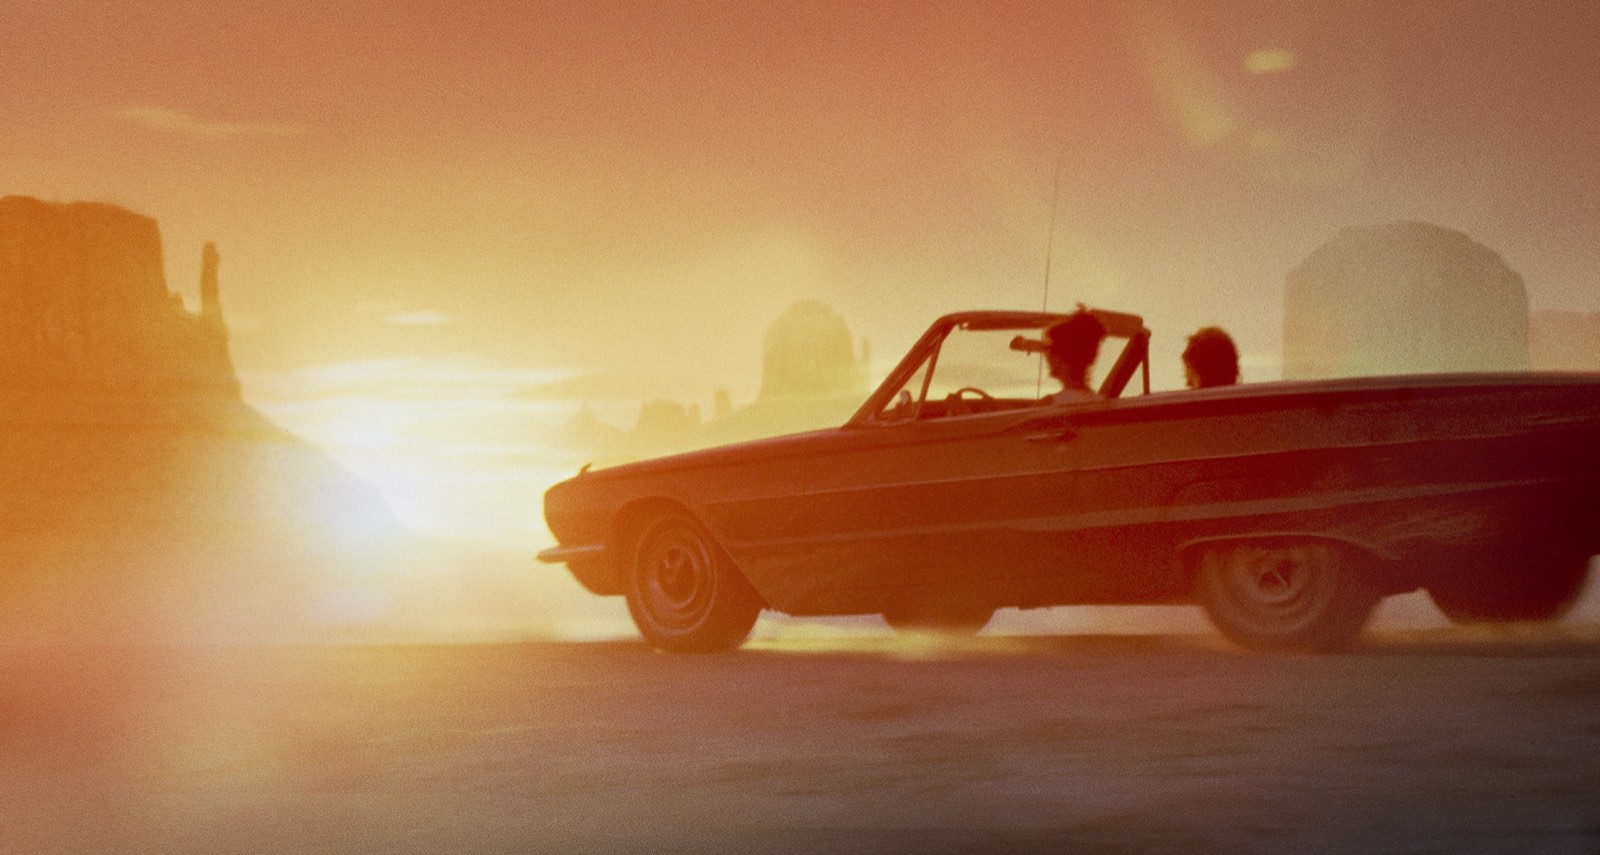 Thelma & Louise hits the road once again in a director-approved 4K restoration